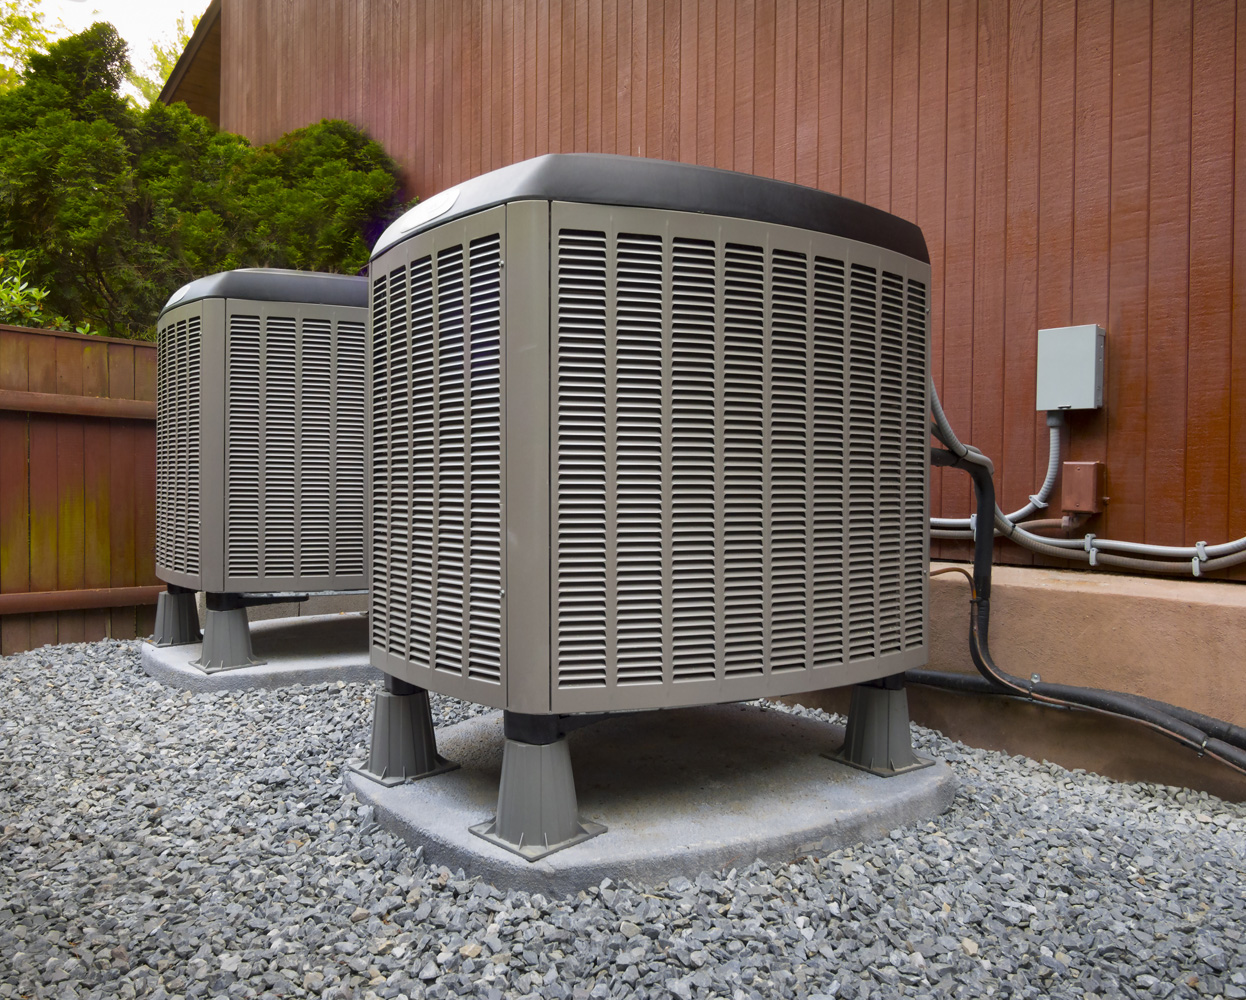 A few smart reasons to upgrade your HVAC now